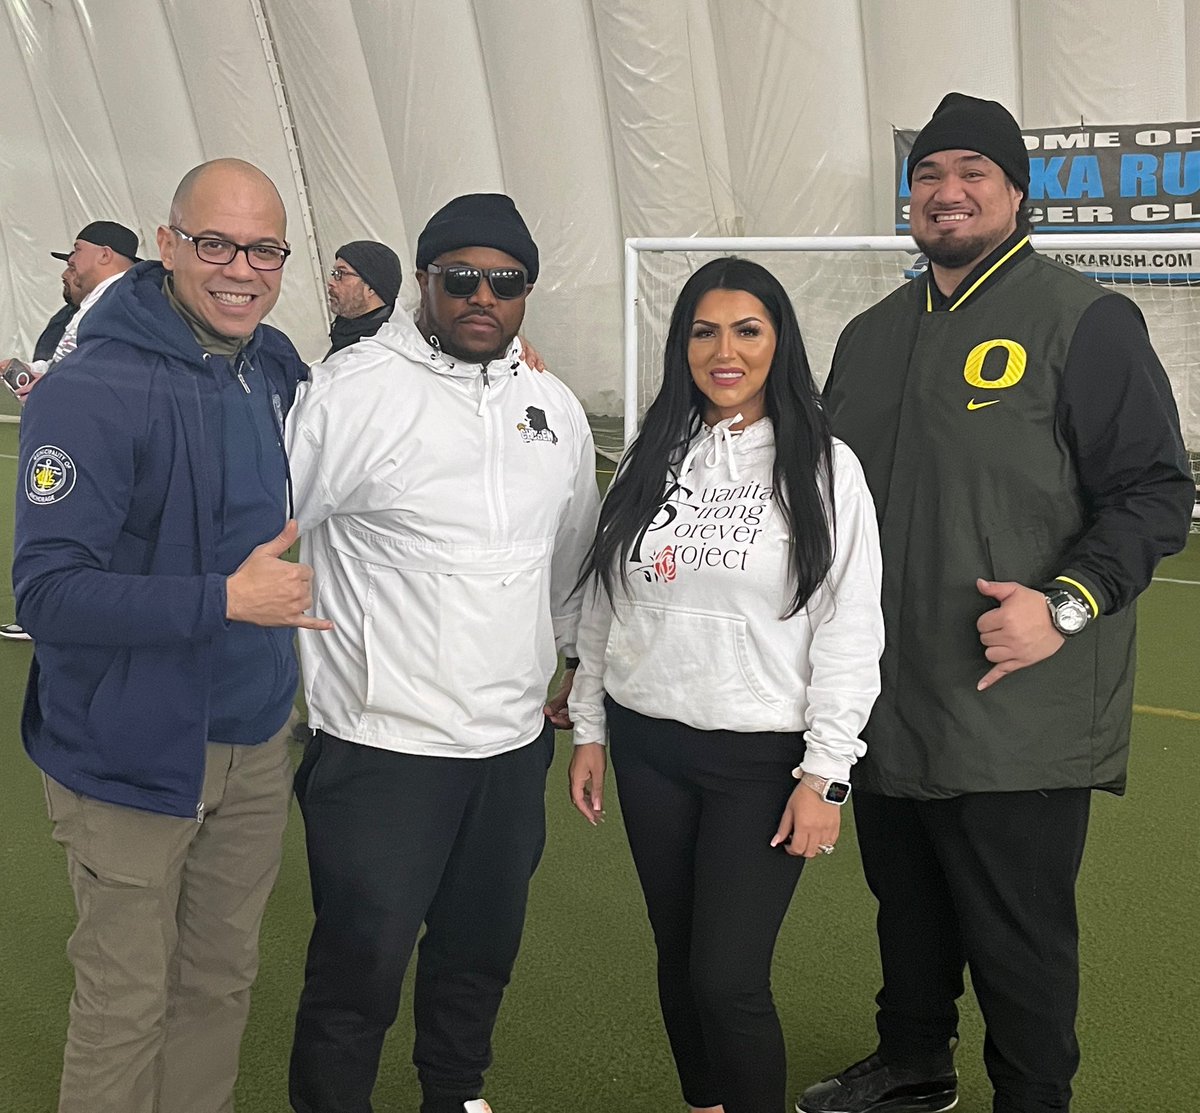 It takes commitment to invest in the success of our youth. Shout out to all of the coaches and parents who support community sports in Anchorage and all across Alaska. I had a chance to visit and speak with youth athletes with Juanita Strong Forever Project and Alaska Chosen!